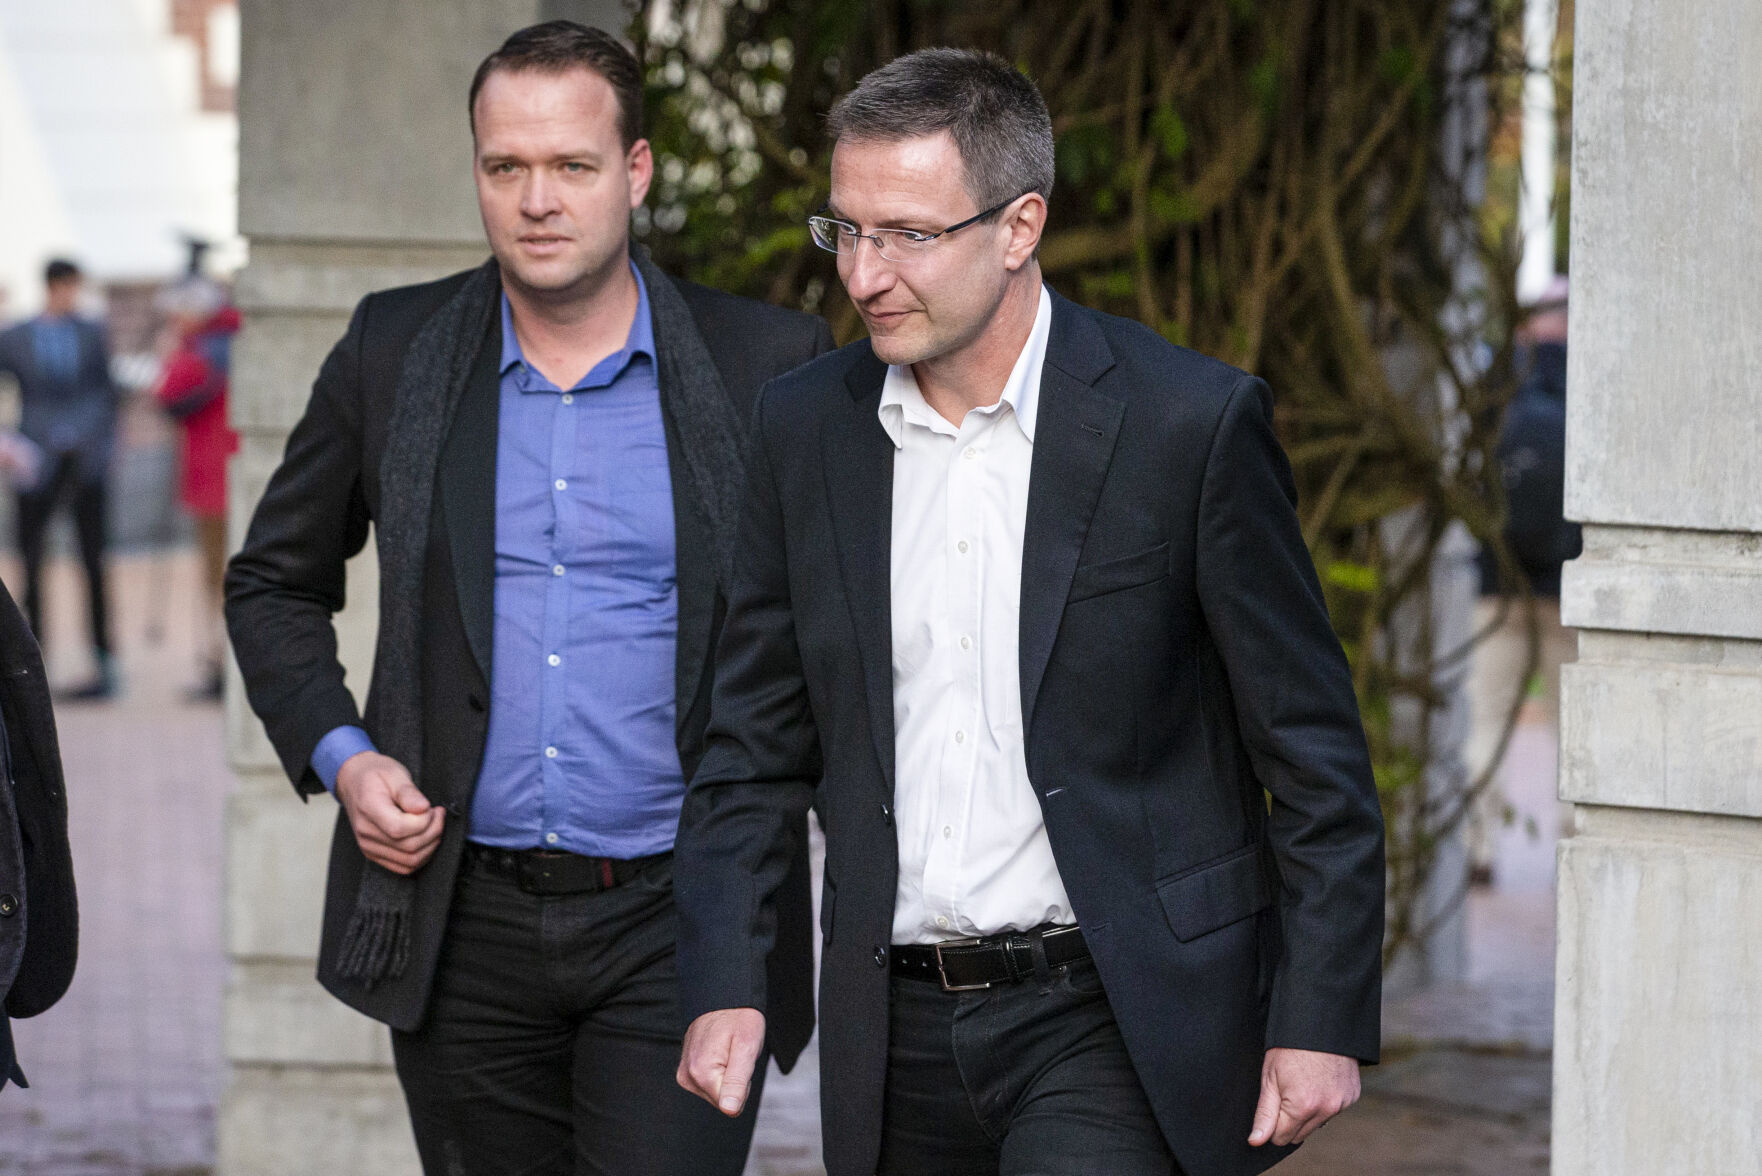 <p>Bram ven der Kolk, letf, and Mathias Ortmann outside court after pleading guilty to their involvement in running the once wildly popular pirating website Megaupload in Auckland, New Zealand, Thursday, June 15, 2023. The pleas by Mathias Ortmann and Bram van der Kolk at the Auckland High Court ended their legal battle to avoid extradition to the U.S. on charges that included racketeering. (New Zealand Herald via AP)</p>   PHOTO CREDIT: New Zealand Herald